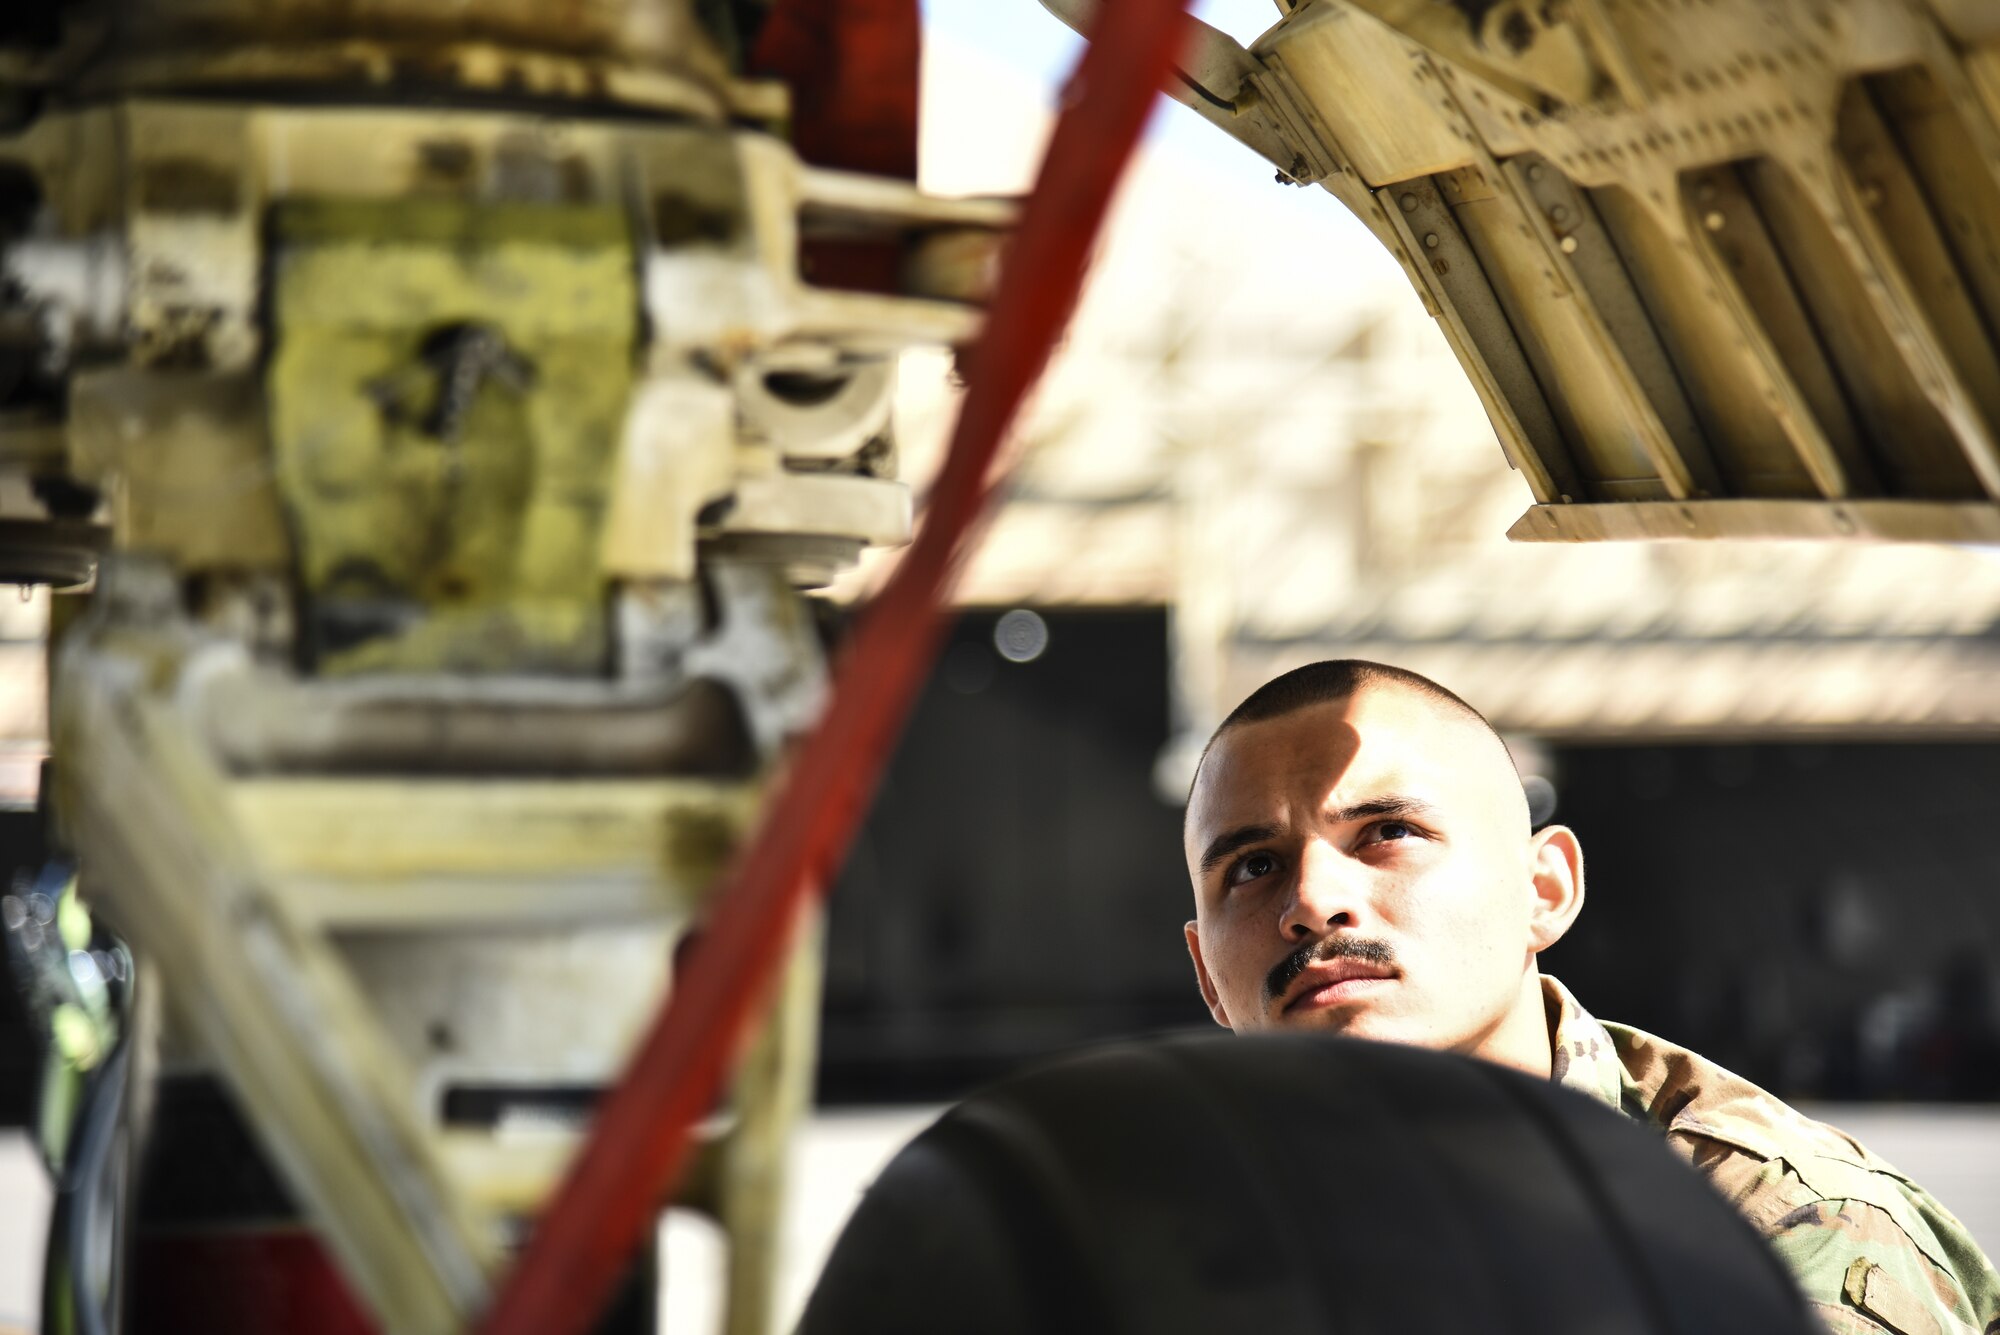 U.S. Air Force Senior Airman Brandon Thomas, 380th Expeditionary Aircraft Maintenance Squadron KC-10 Extender aircraft repair mechanic and Crash Damaged or Disabled Aircraft Recovery team member, participates in familiarization training at Al Dhafra Air Base, United Arab Emirates, Nov. 14, 2018. The CDDAR team is not only responsible for responding to the aircraft assigned to ADAB, but all aircraft in the U.S. Air Forces Central Command area of responsibility. The AFCENT AOR ranges from the top of Uzbekistan near the Aral Sea, all the way to the southern tip of Yemen – spanning across 20 Central and Southwest Asian countries. (U.S. Air Force photo by Senior Airman Mya M. Crosby)